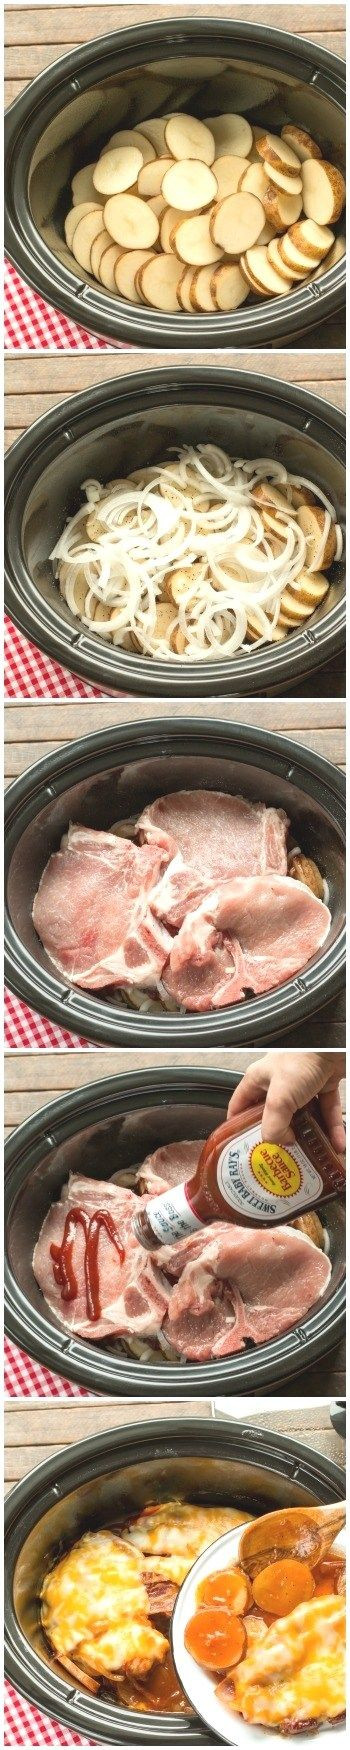 Sweet Baby Ray'S Bbq Pork Chops In Oven
 Slow Cooker Barbecue Slow Cooker Barbecue Pork Chops